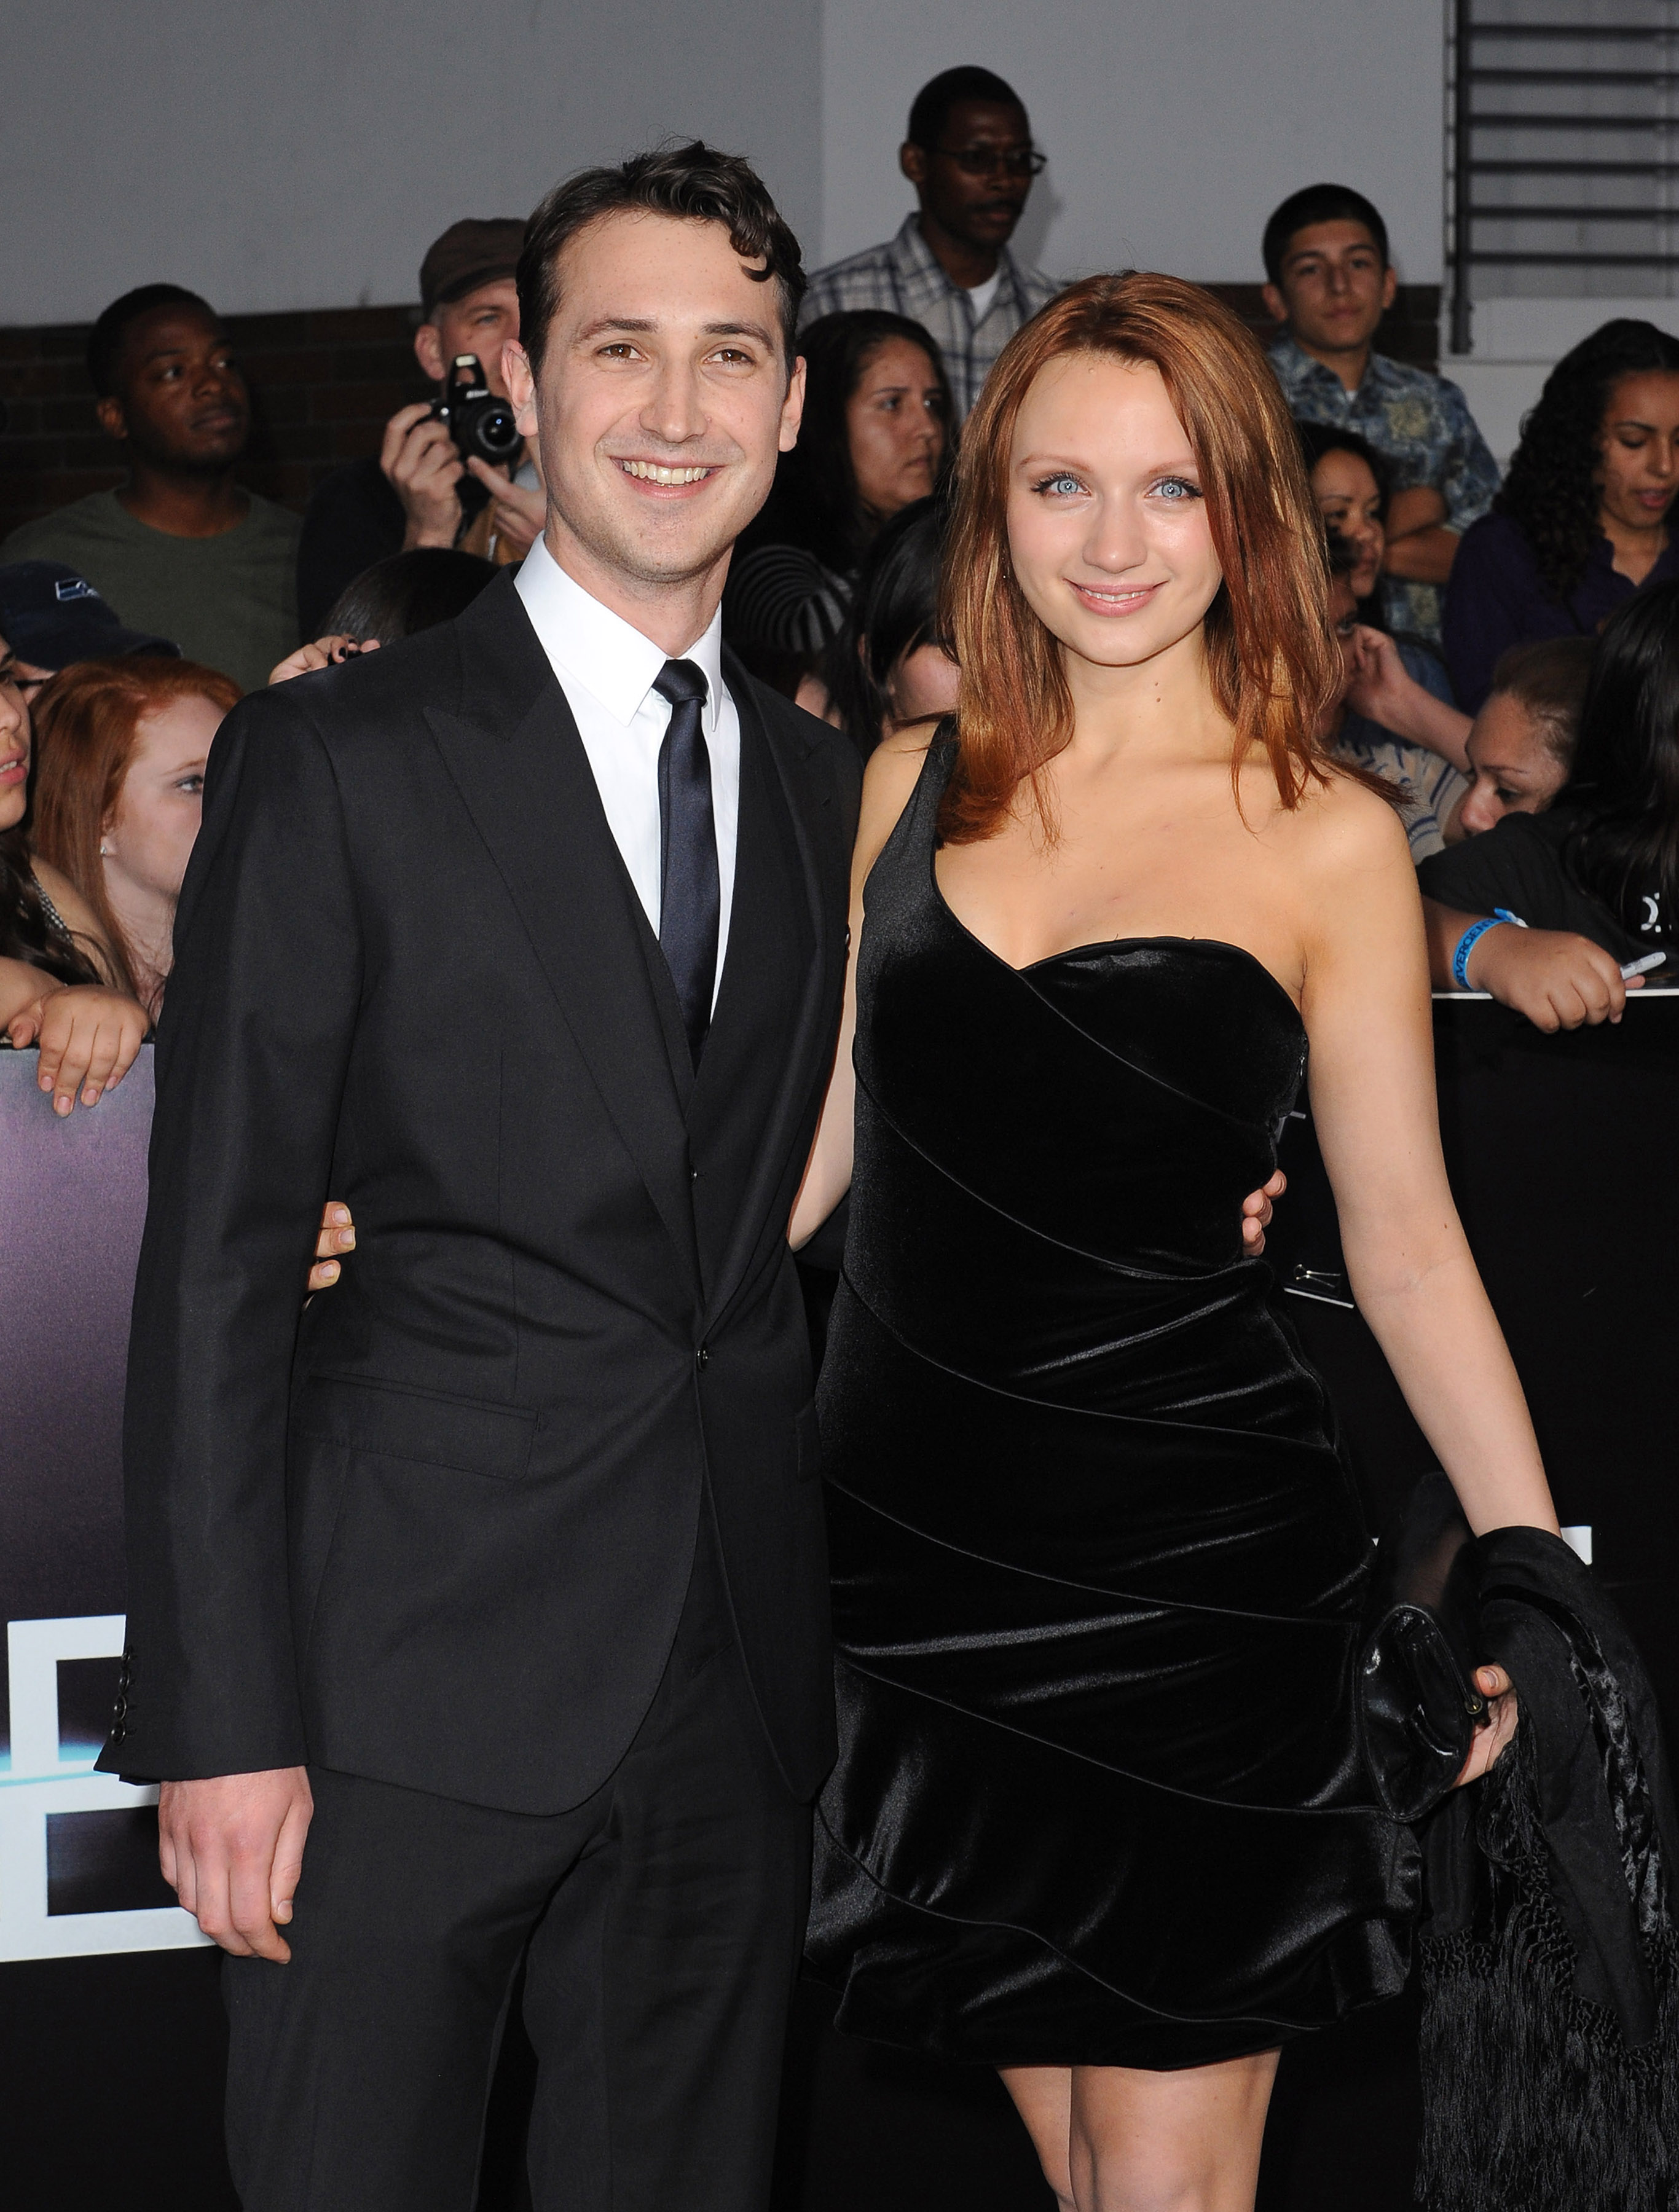 Actor Ben Lloyd-Hughes and Emily Berrington arrive at the Los Angeles Premiere of "Divergent" at Regency Bruin Theatre on March 18, 2014 in Los Angeles, California | Source: Getty Images